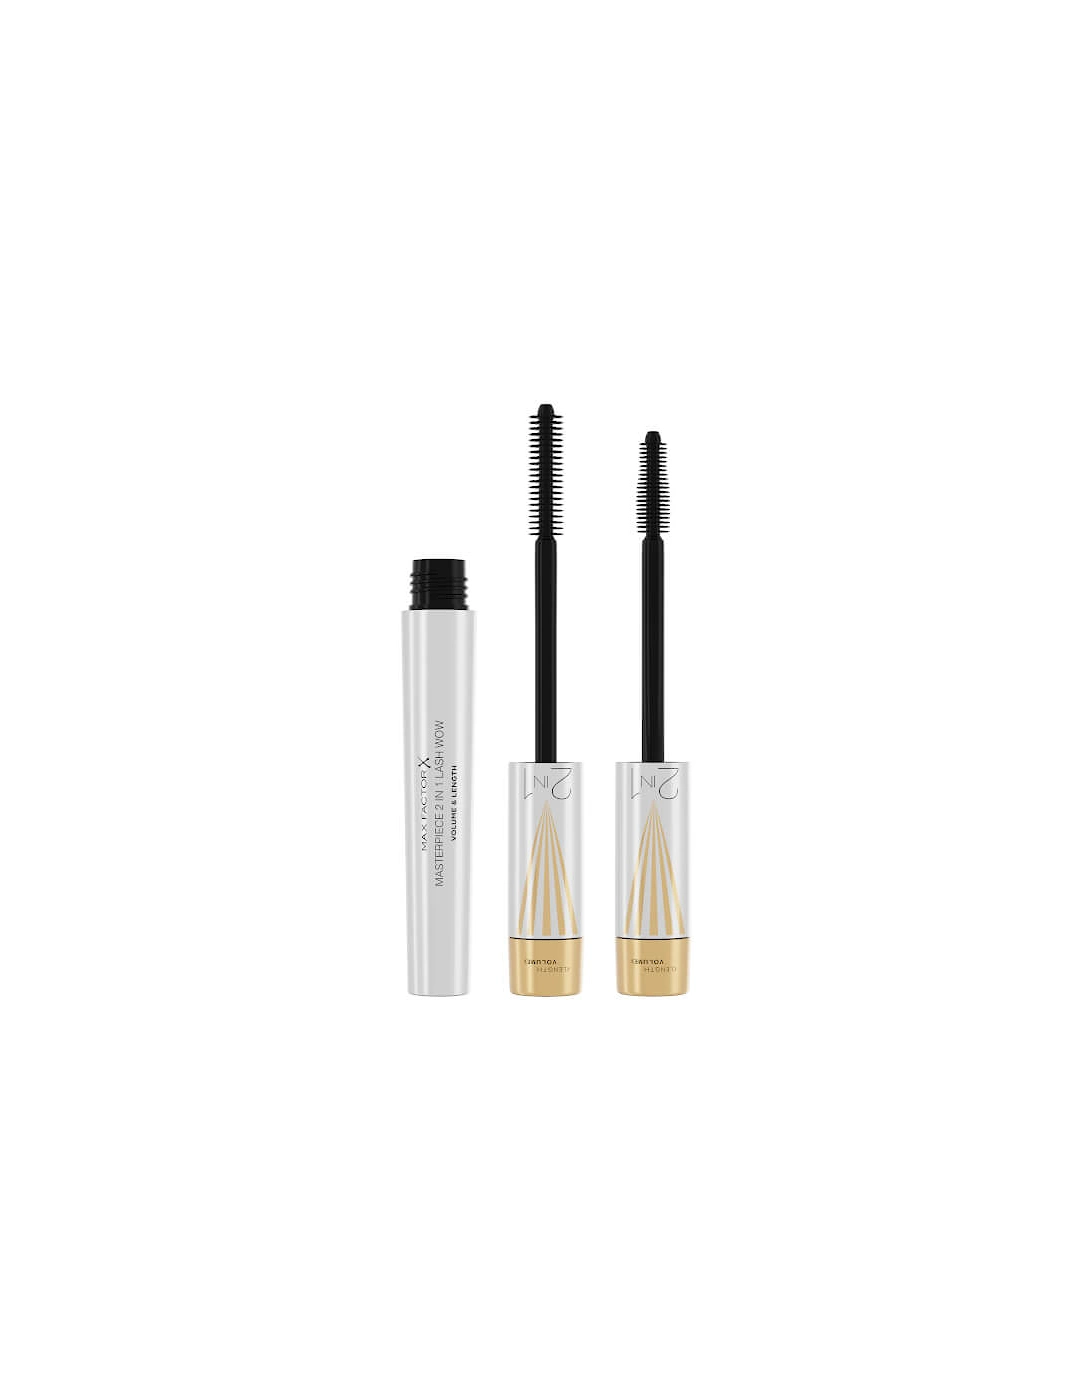 Masterpiece 2-in-1 Lash WOW Volume and Length Mascara - 001 Black 7ml, 2 of 1